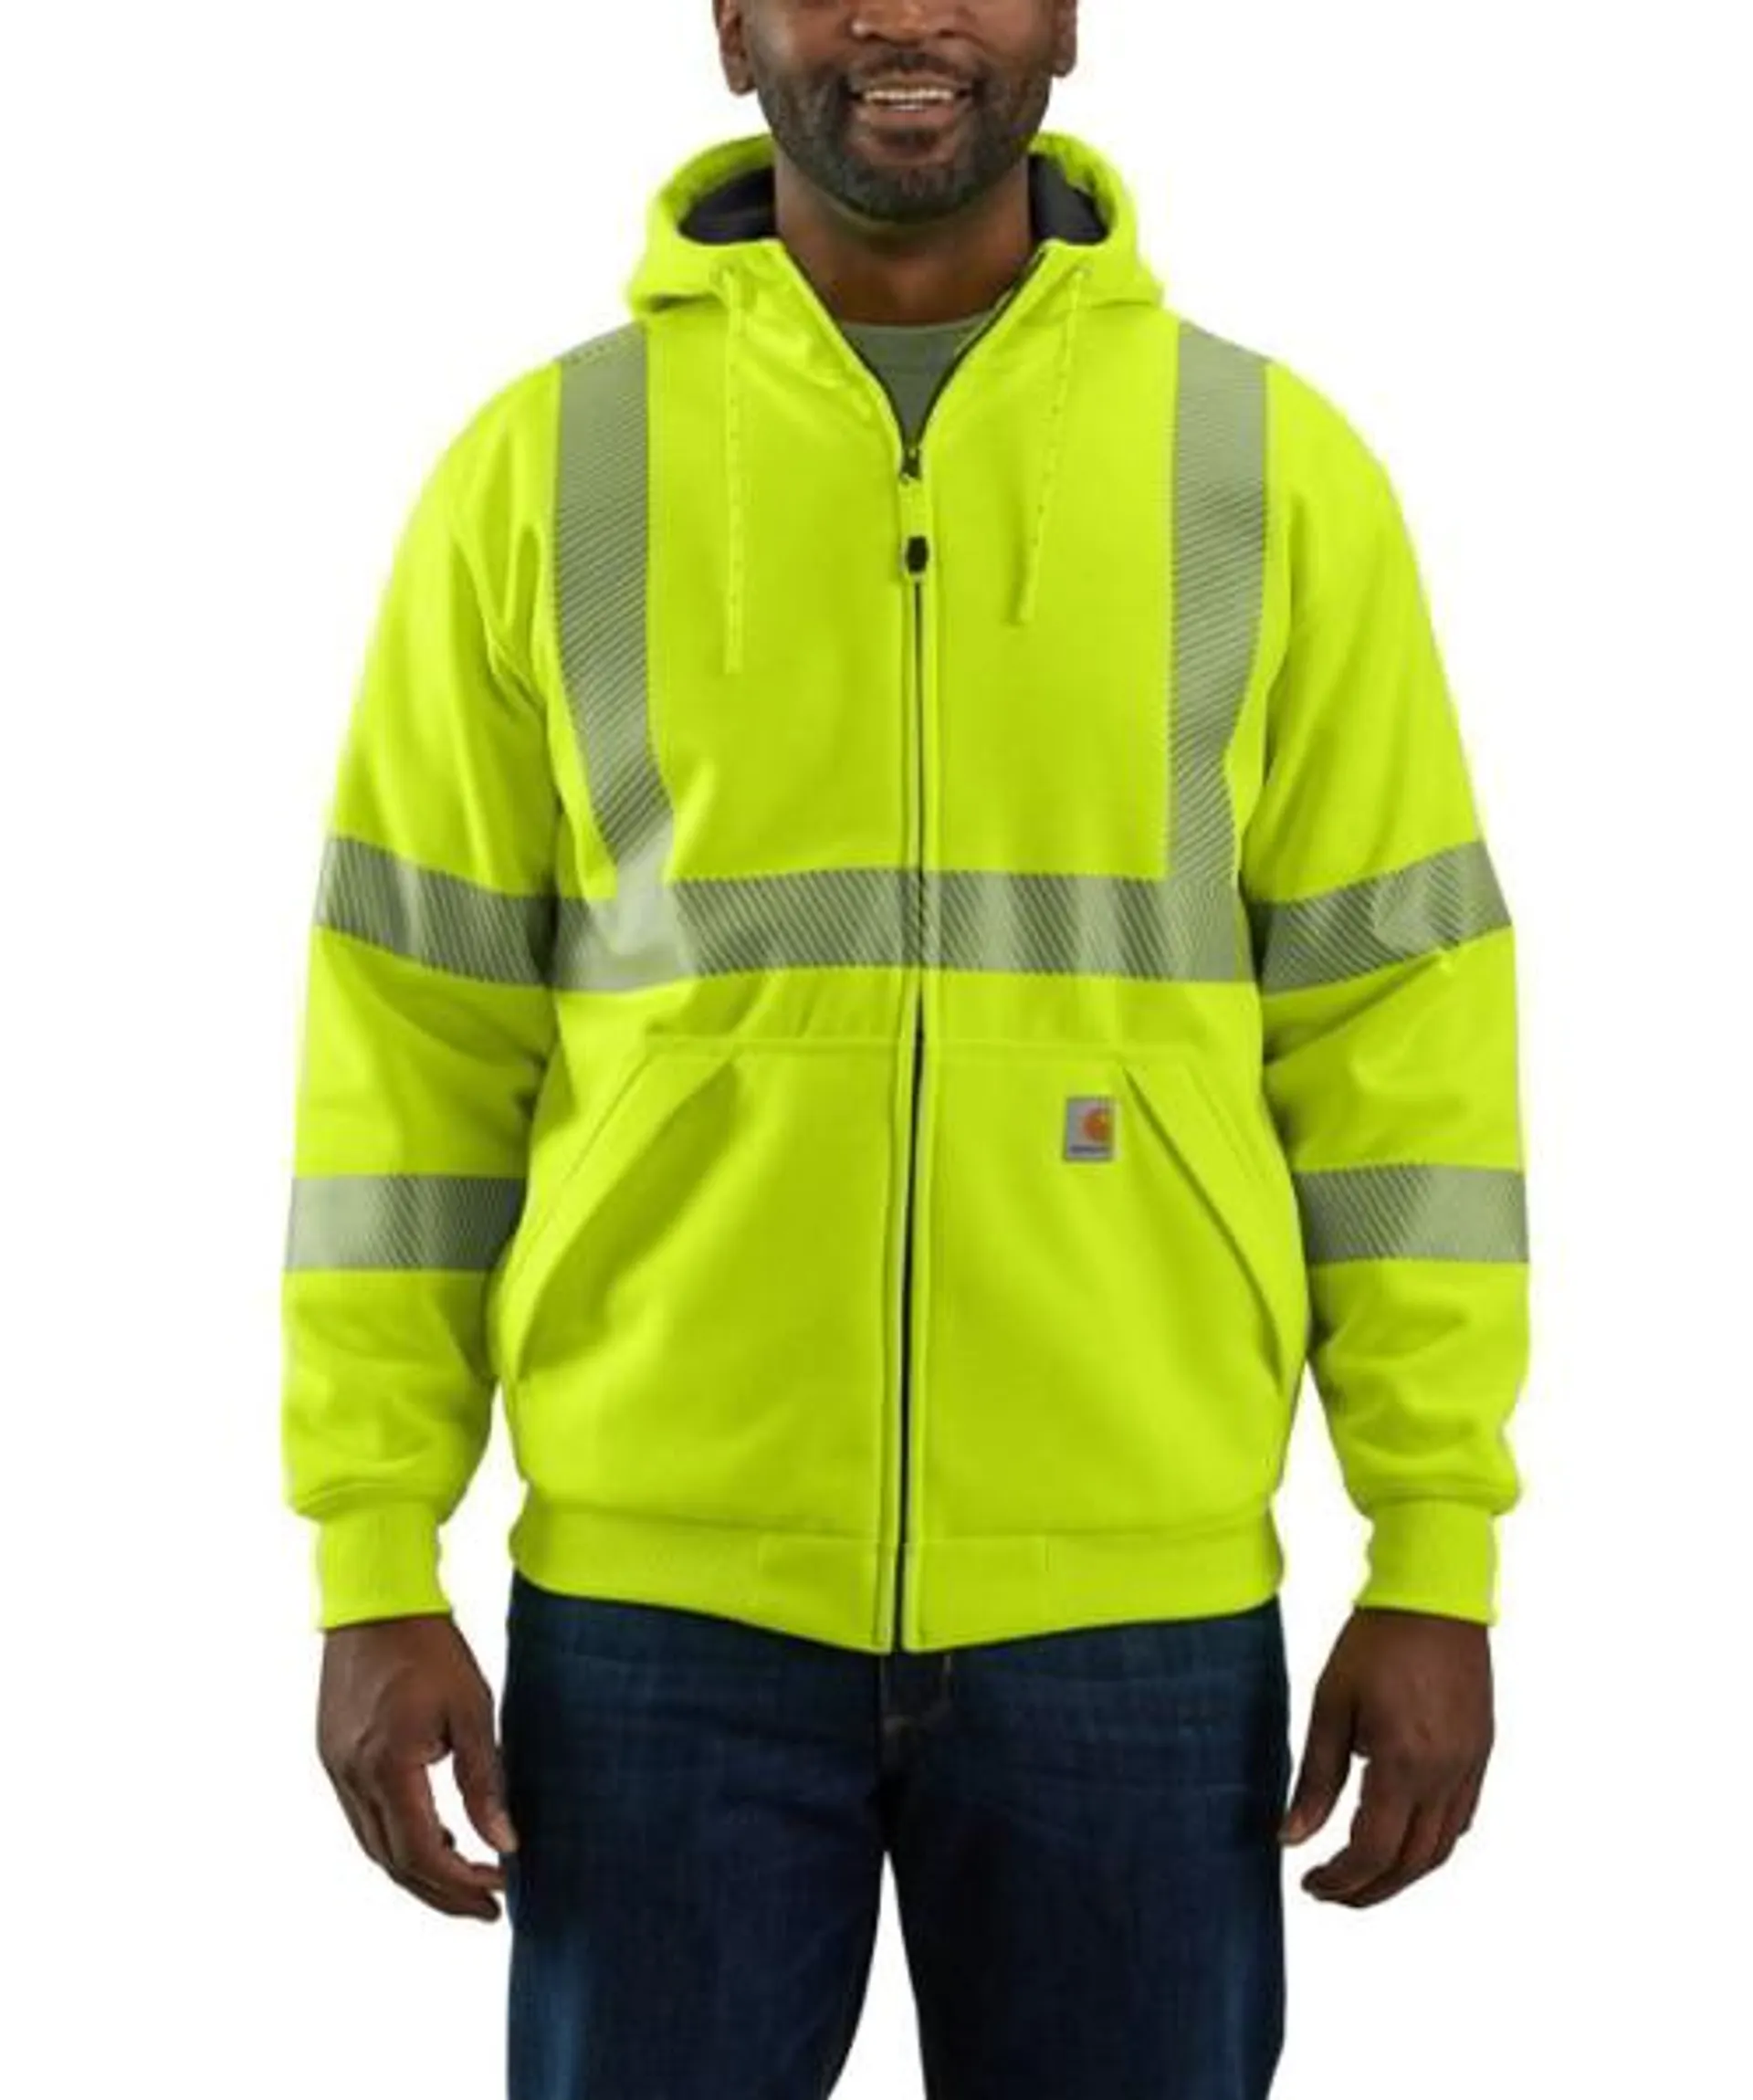 Carhartt Mens High-Visibility Loose-Fit Midweight Thermal-Lined Full Zip Class 3 Sweatshirt